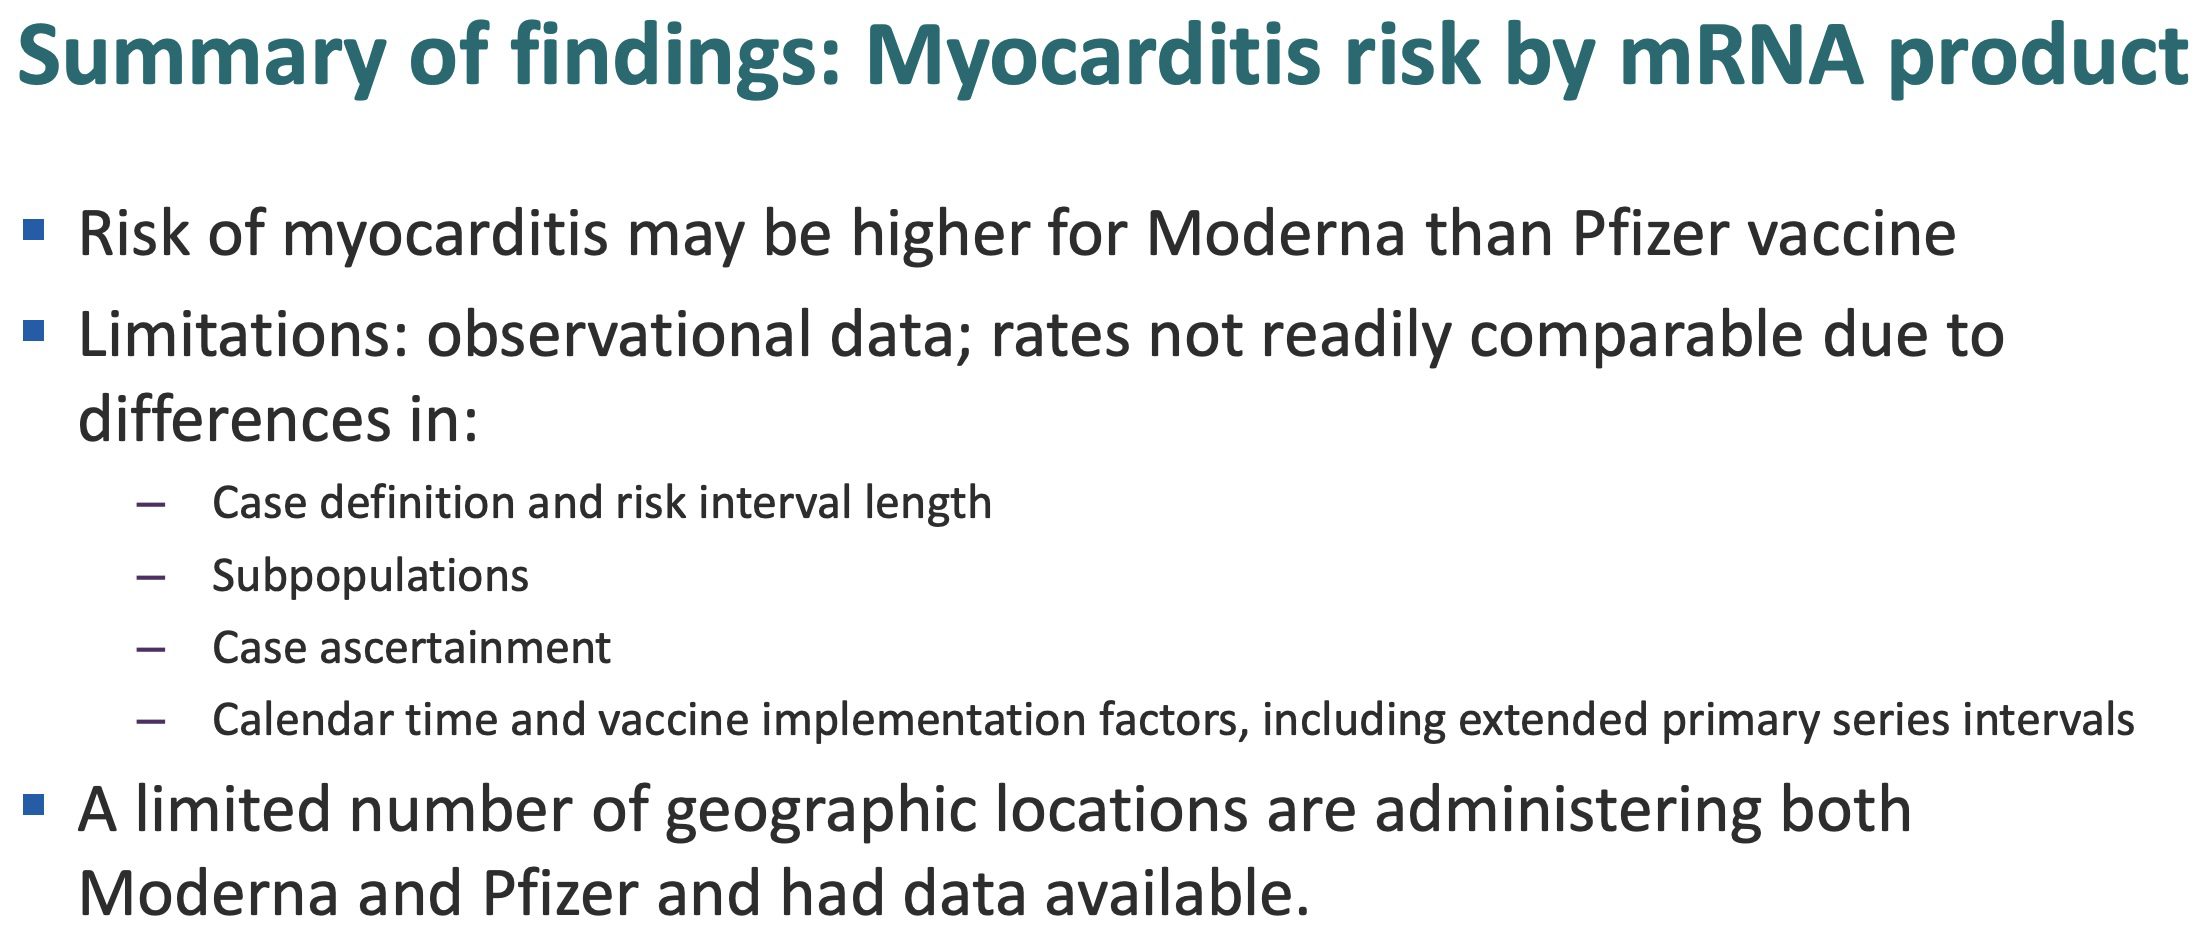  CDC Releases International Data on Risk of Myocarditis Caused by mRNA Covid-19 Vaccines Screen-Shot-2022-03-02-at-3.21.55-AM